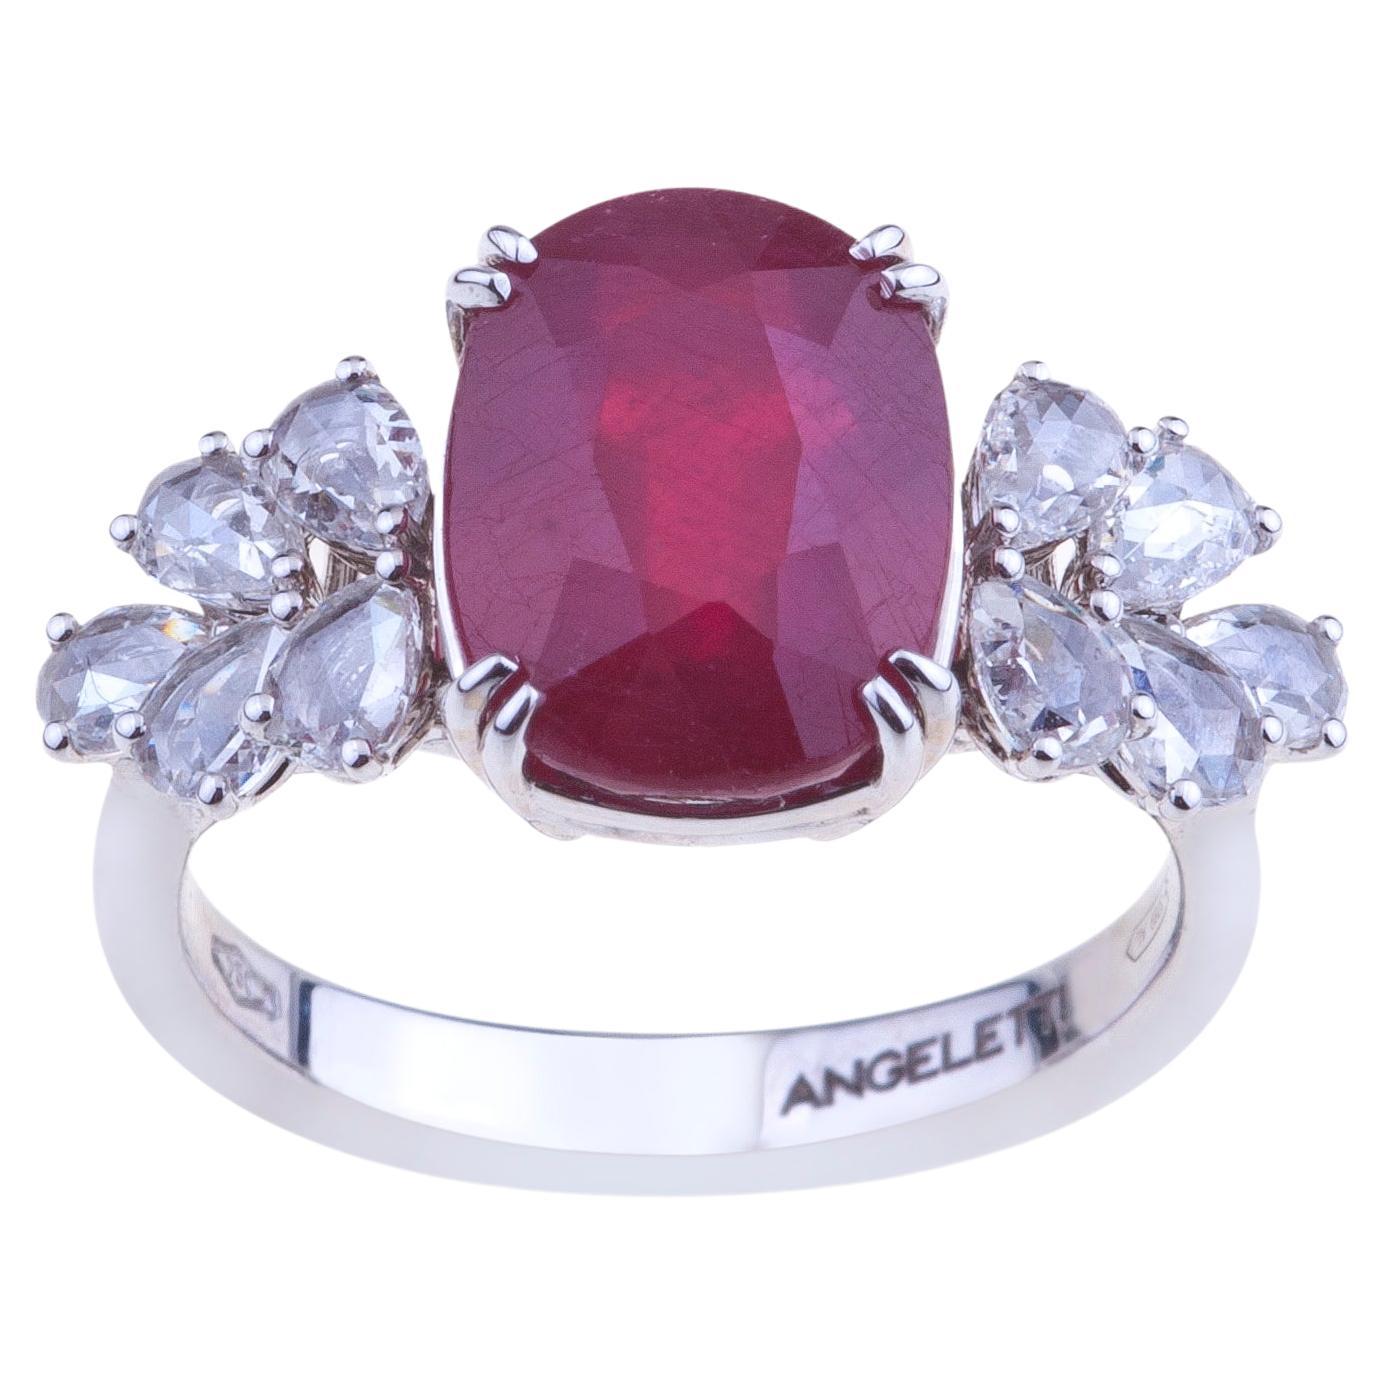 Antique Cut Ruby Ring White Gold with Diamonds